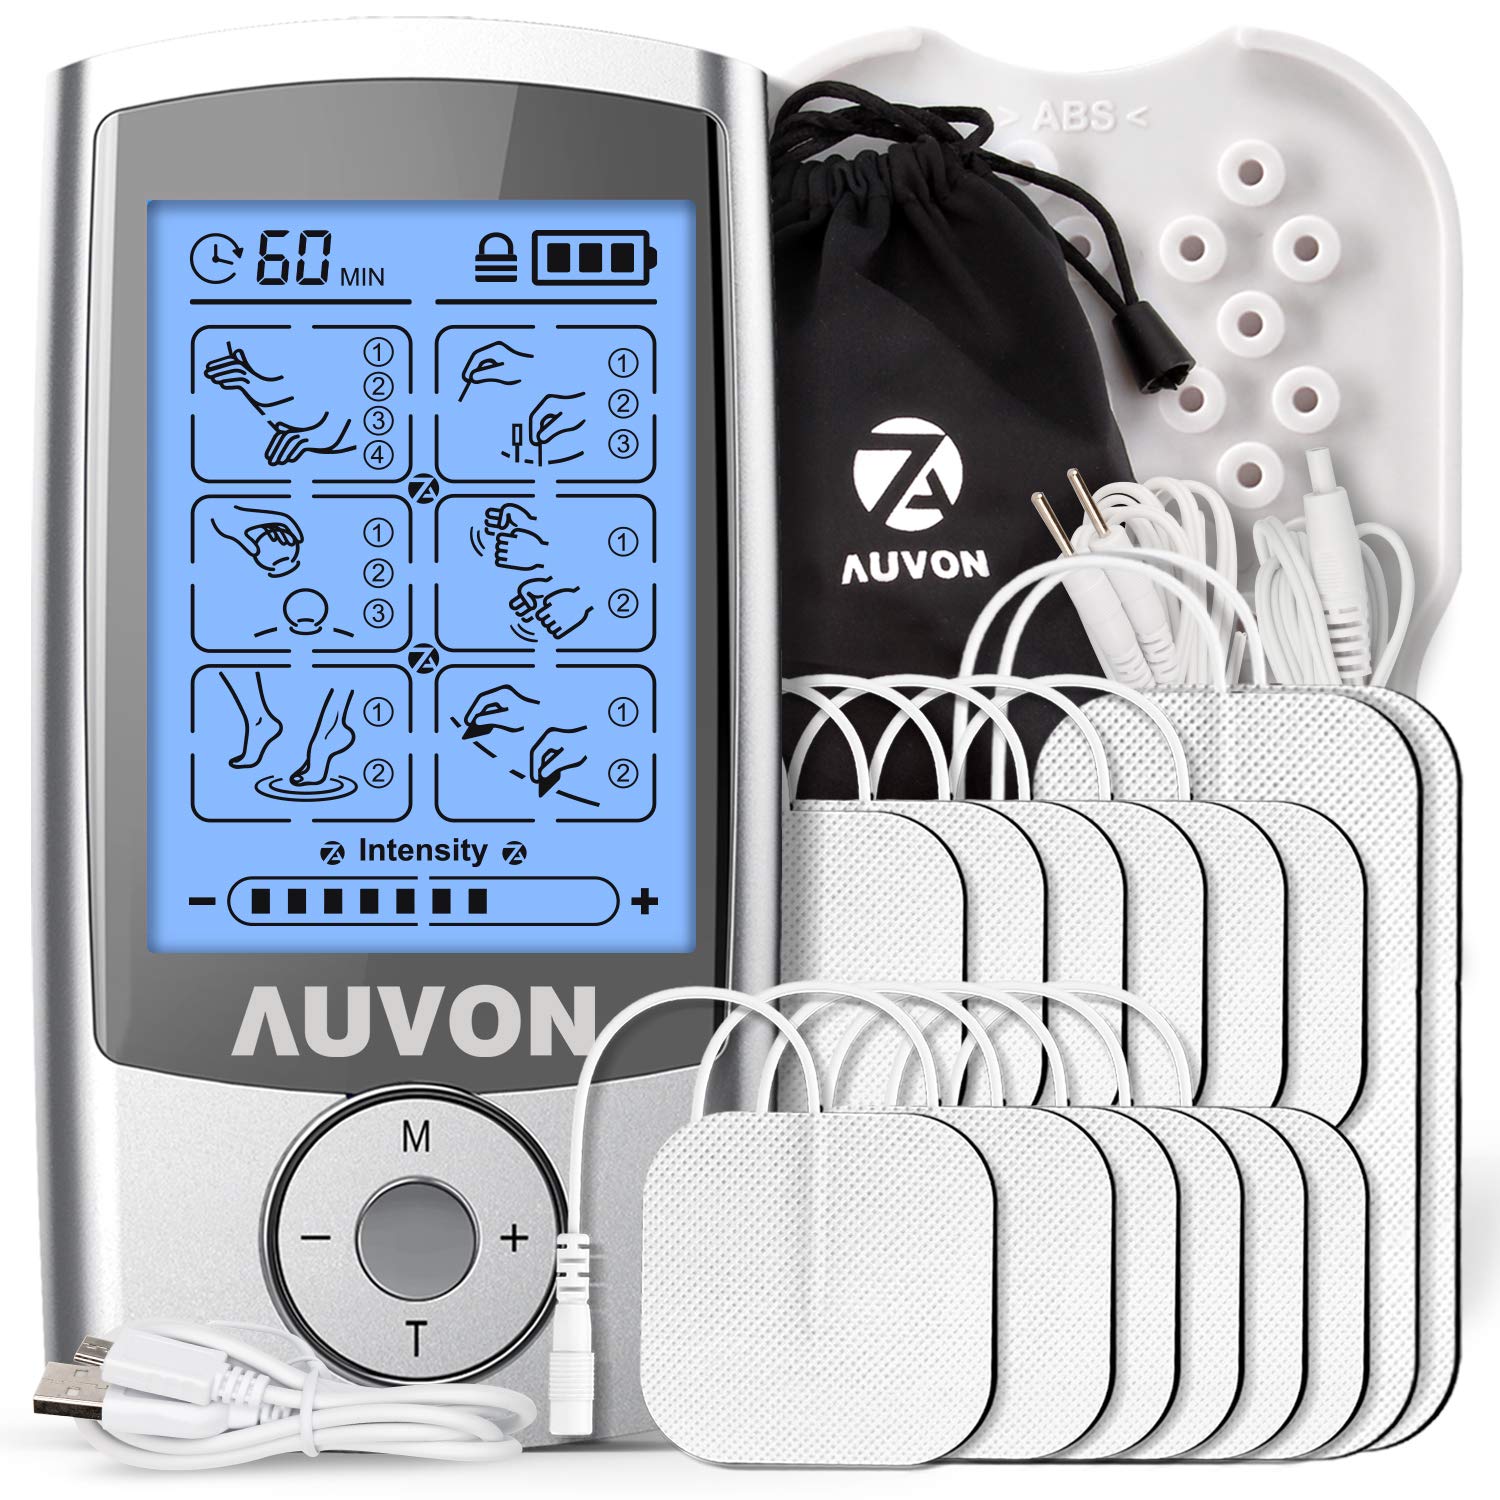 TENS unit for foot and ankle pain.